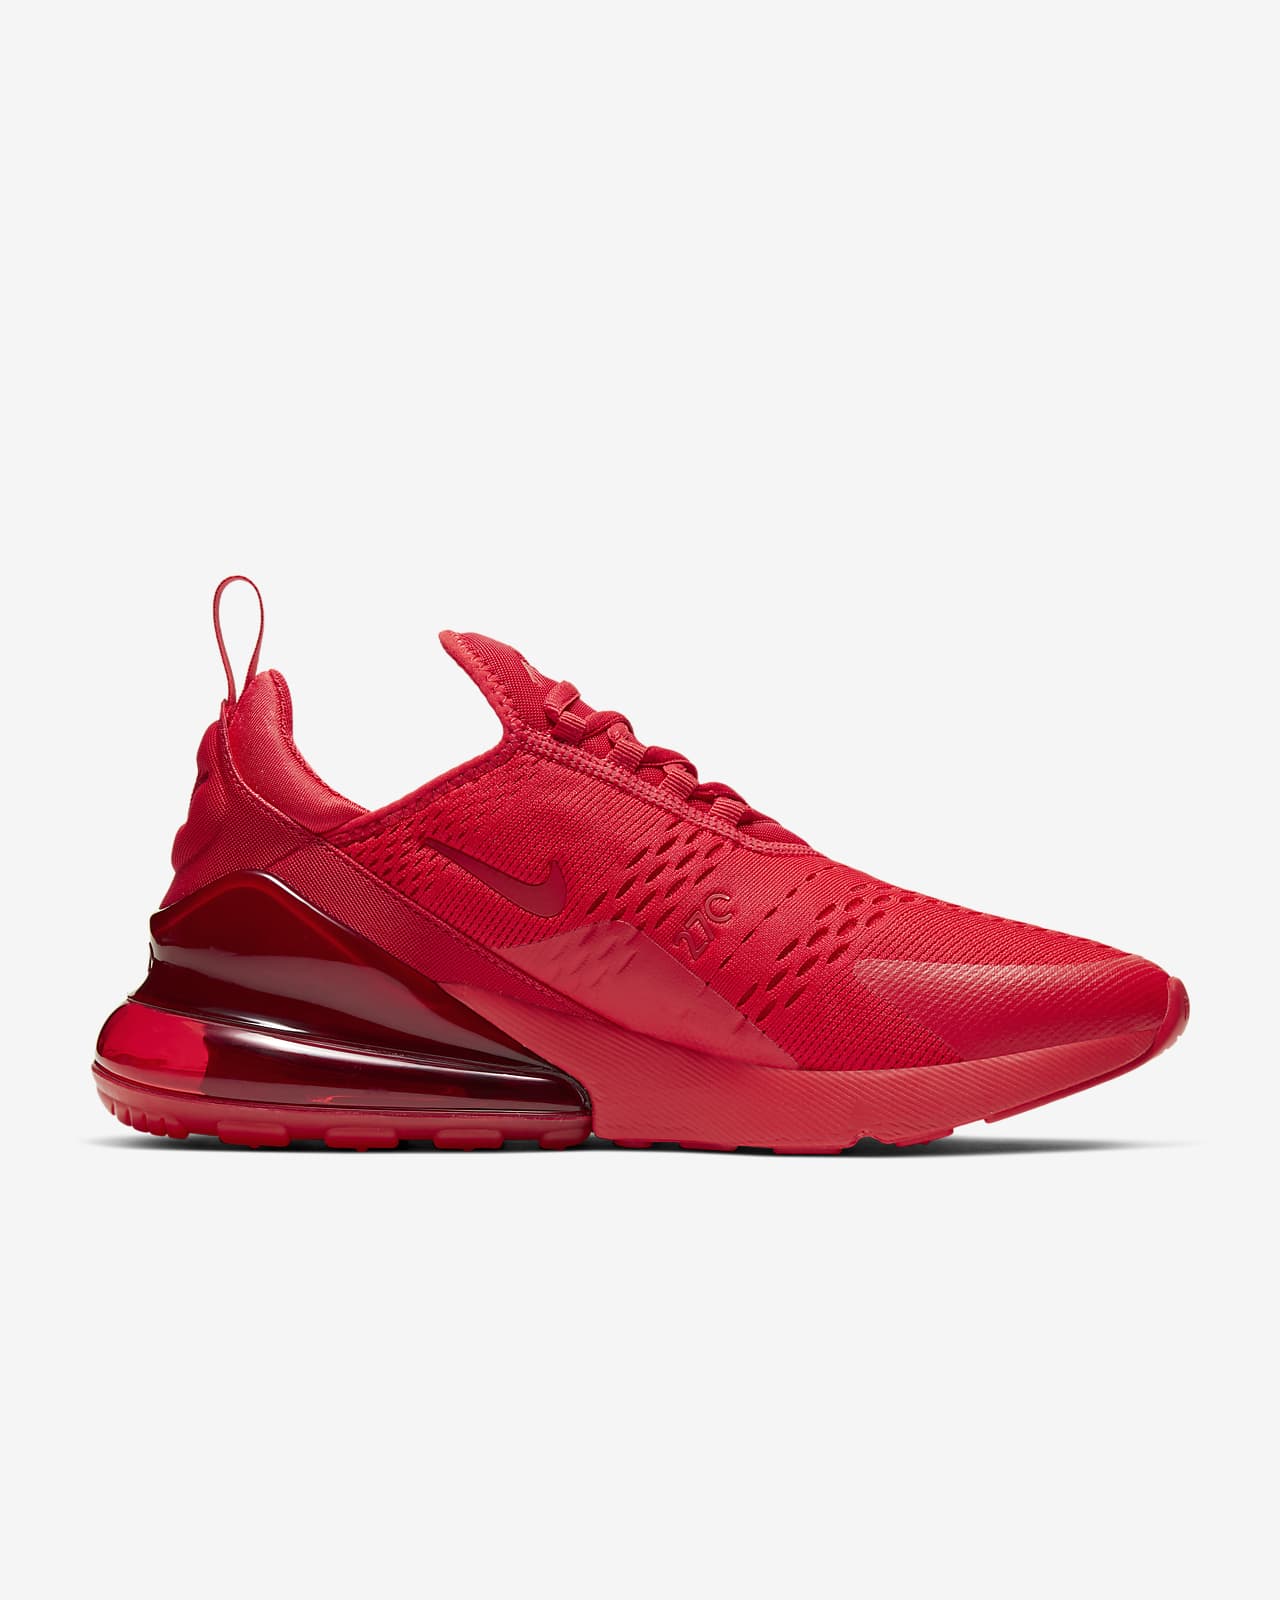 nike air max 270 men's white and red